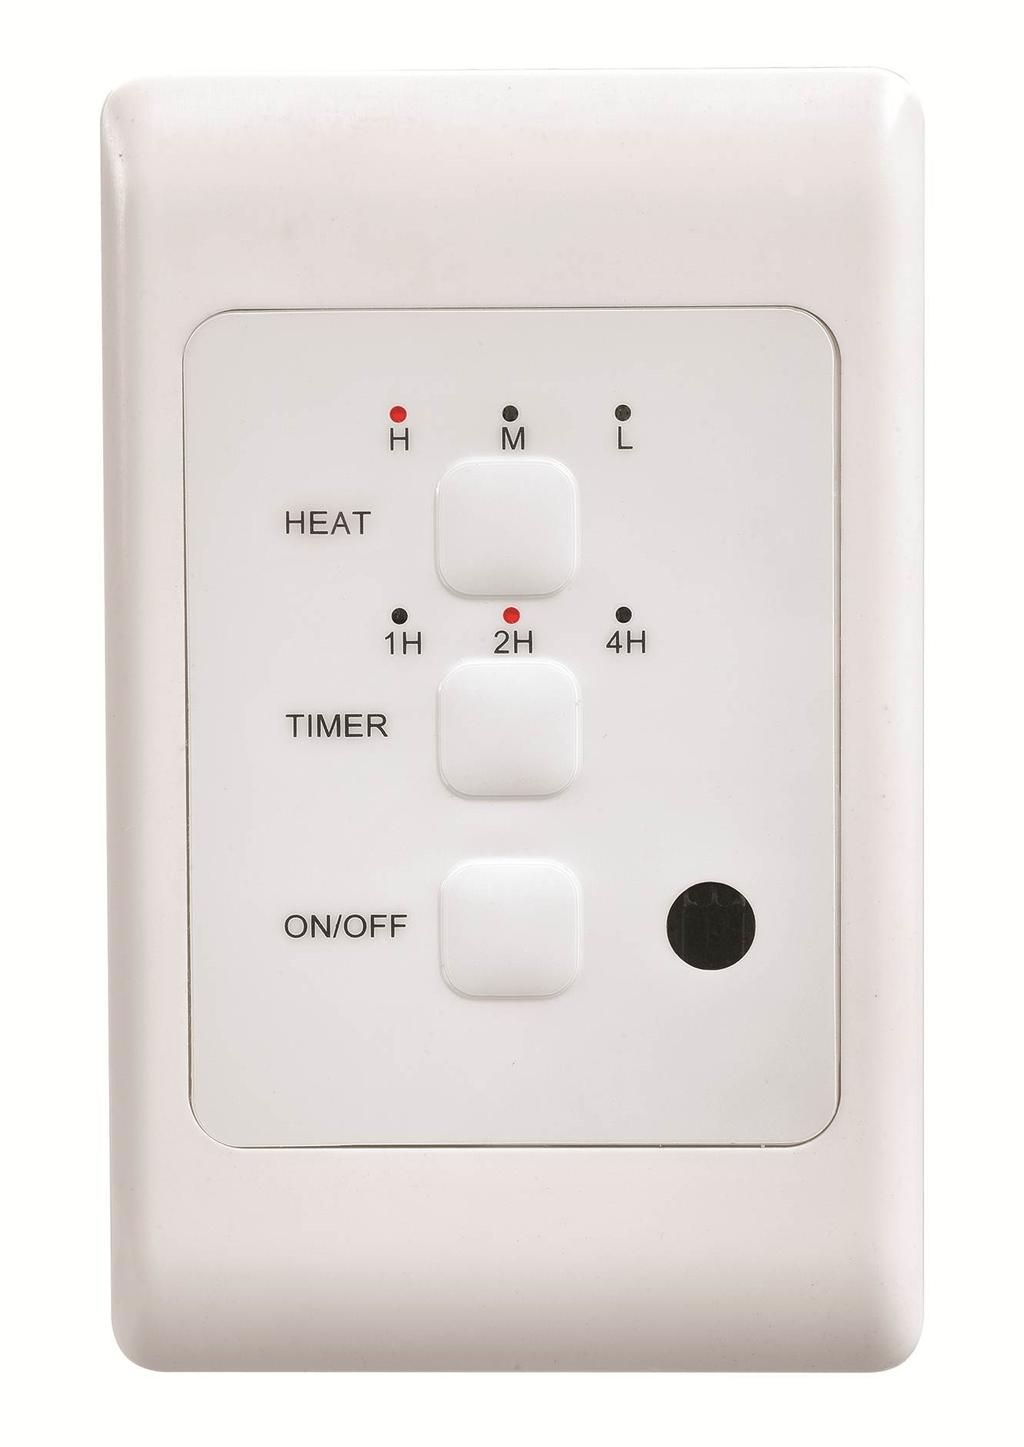 HEATSTRIP Wall Controller with Remote The HEATSTRIP Indoor can be controlled via a simple on/off wall mounted switch, however it is recommended to use a controller with a variable heat modulator and